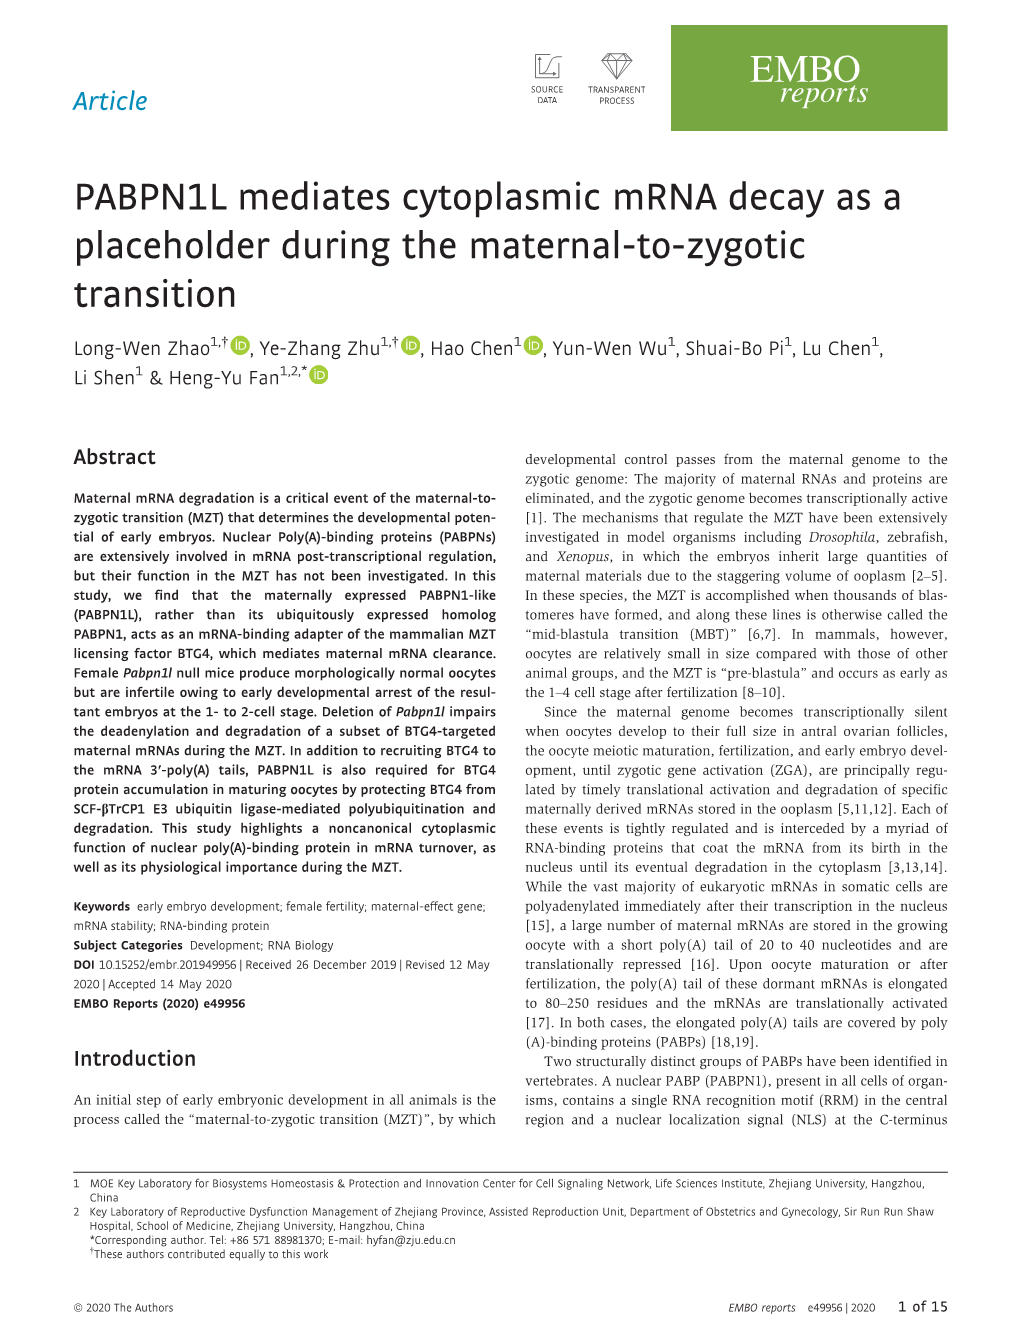 PABPN1L Mediates Cytoplasmic Mrna Decay As a Placeholder During the Maternal‐To‐Zygotic Transition